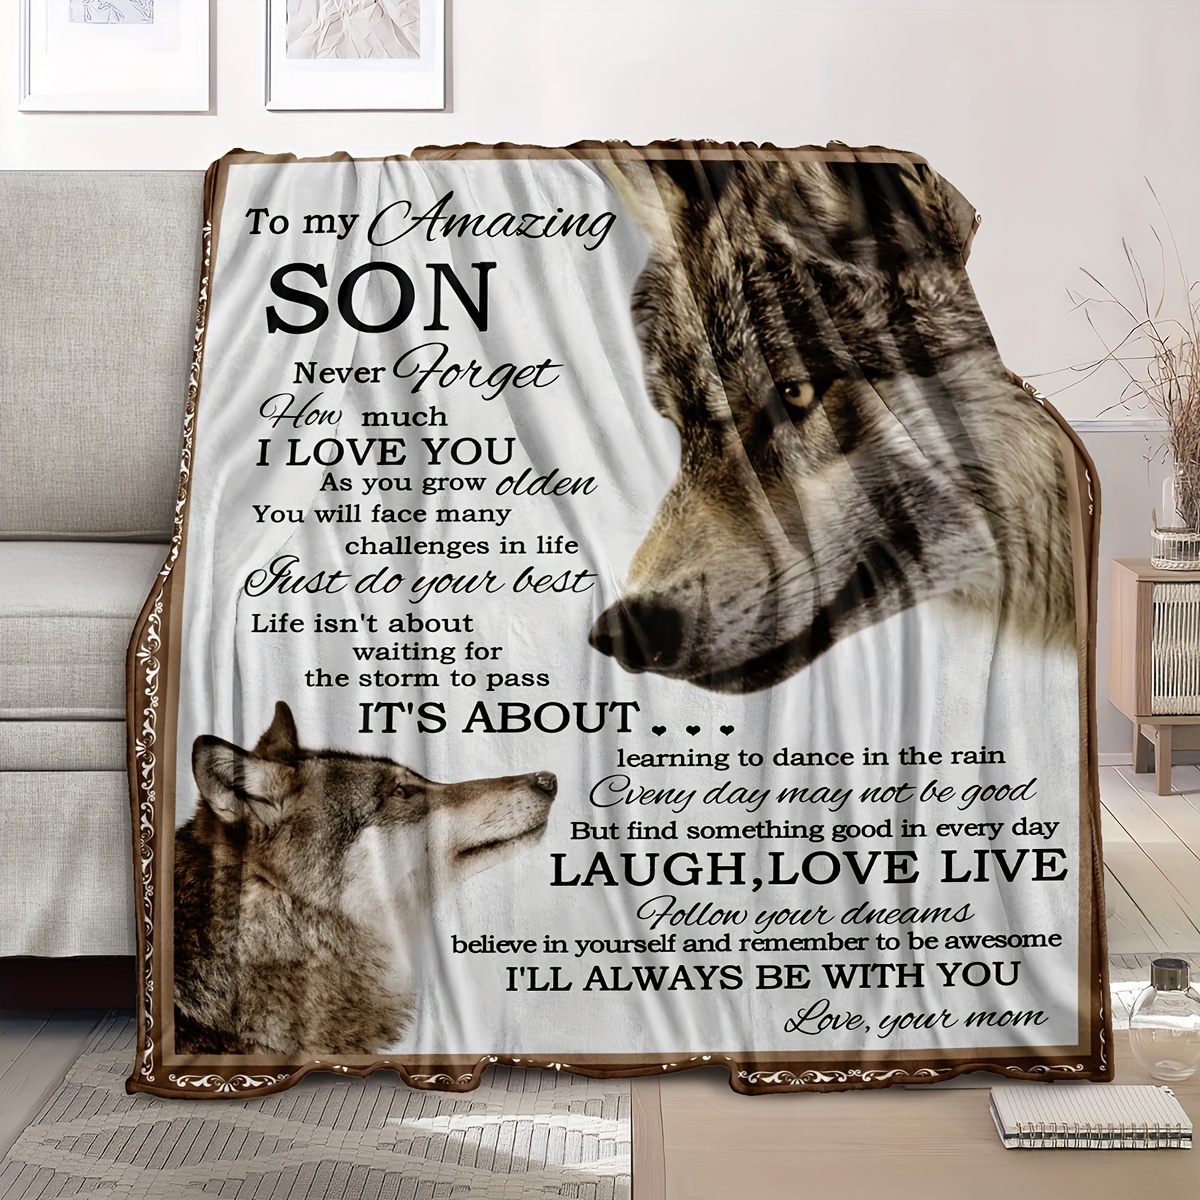 Gifts for Mom Blanket for Mom Birthday Gift Ideas Great Mom Gifts